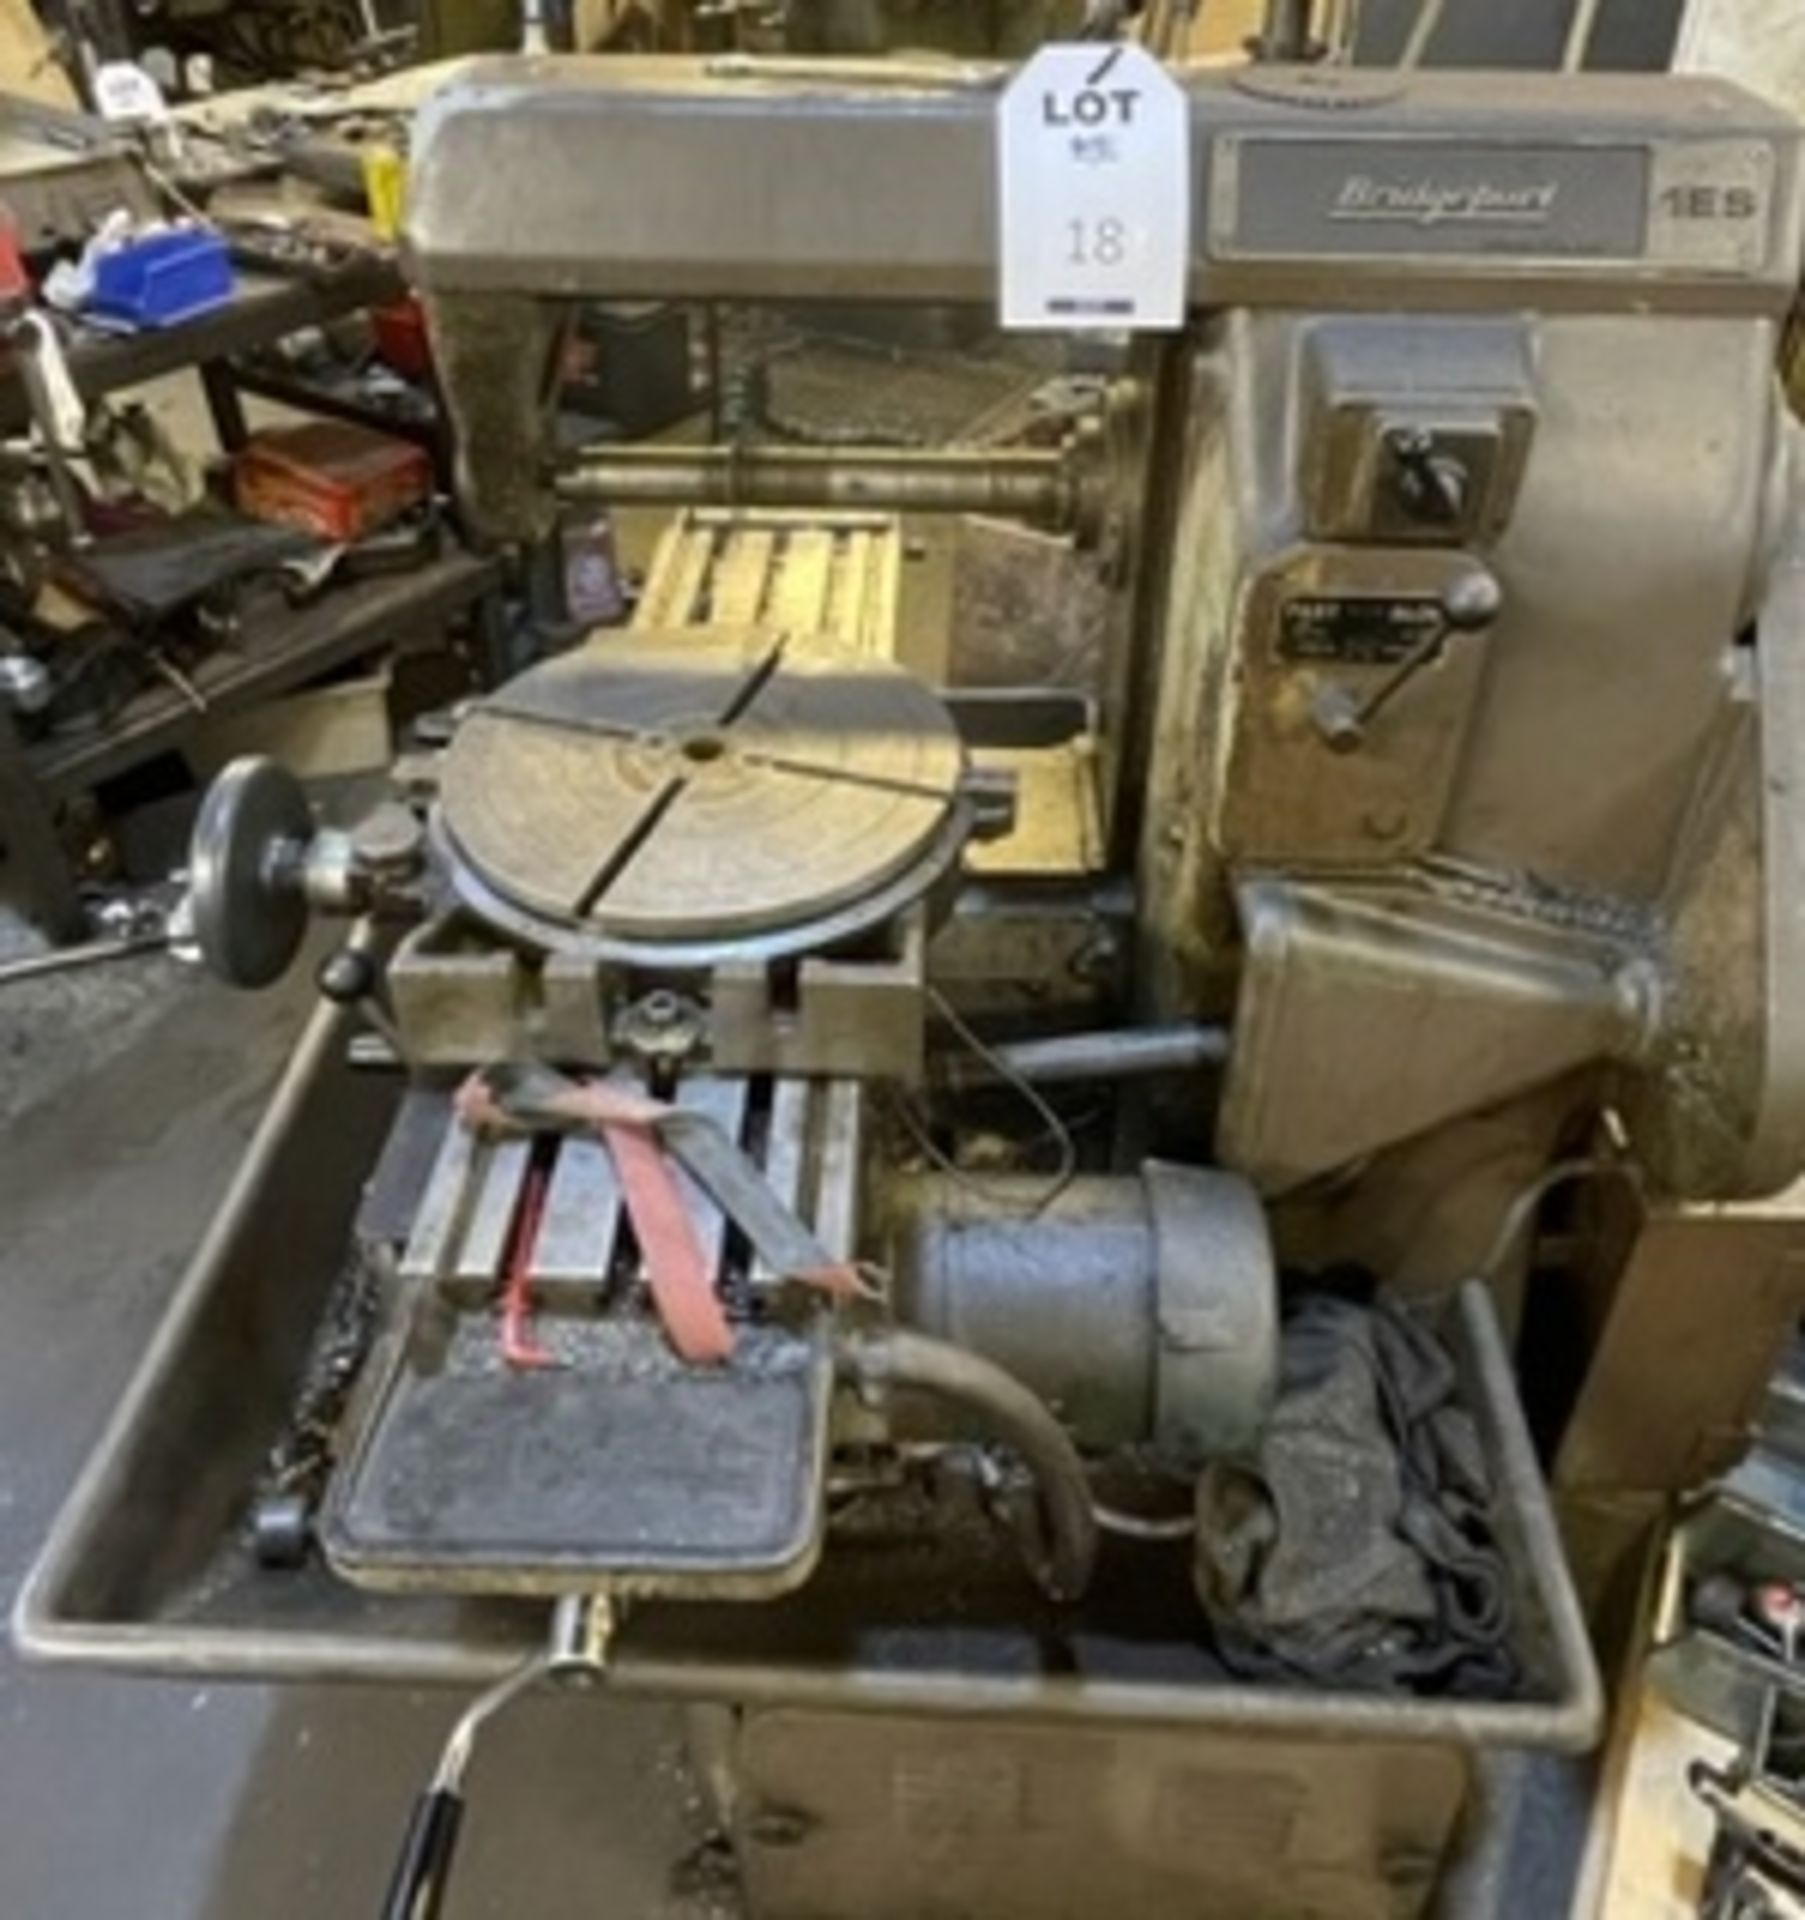 Bridgeport 1ES Slot Cutting Machine with Adjustable Table Feed with Fitted Rotary Table, Arbor & - Image 2 of 3